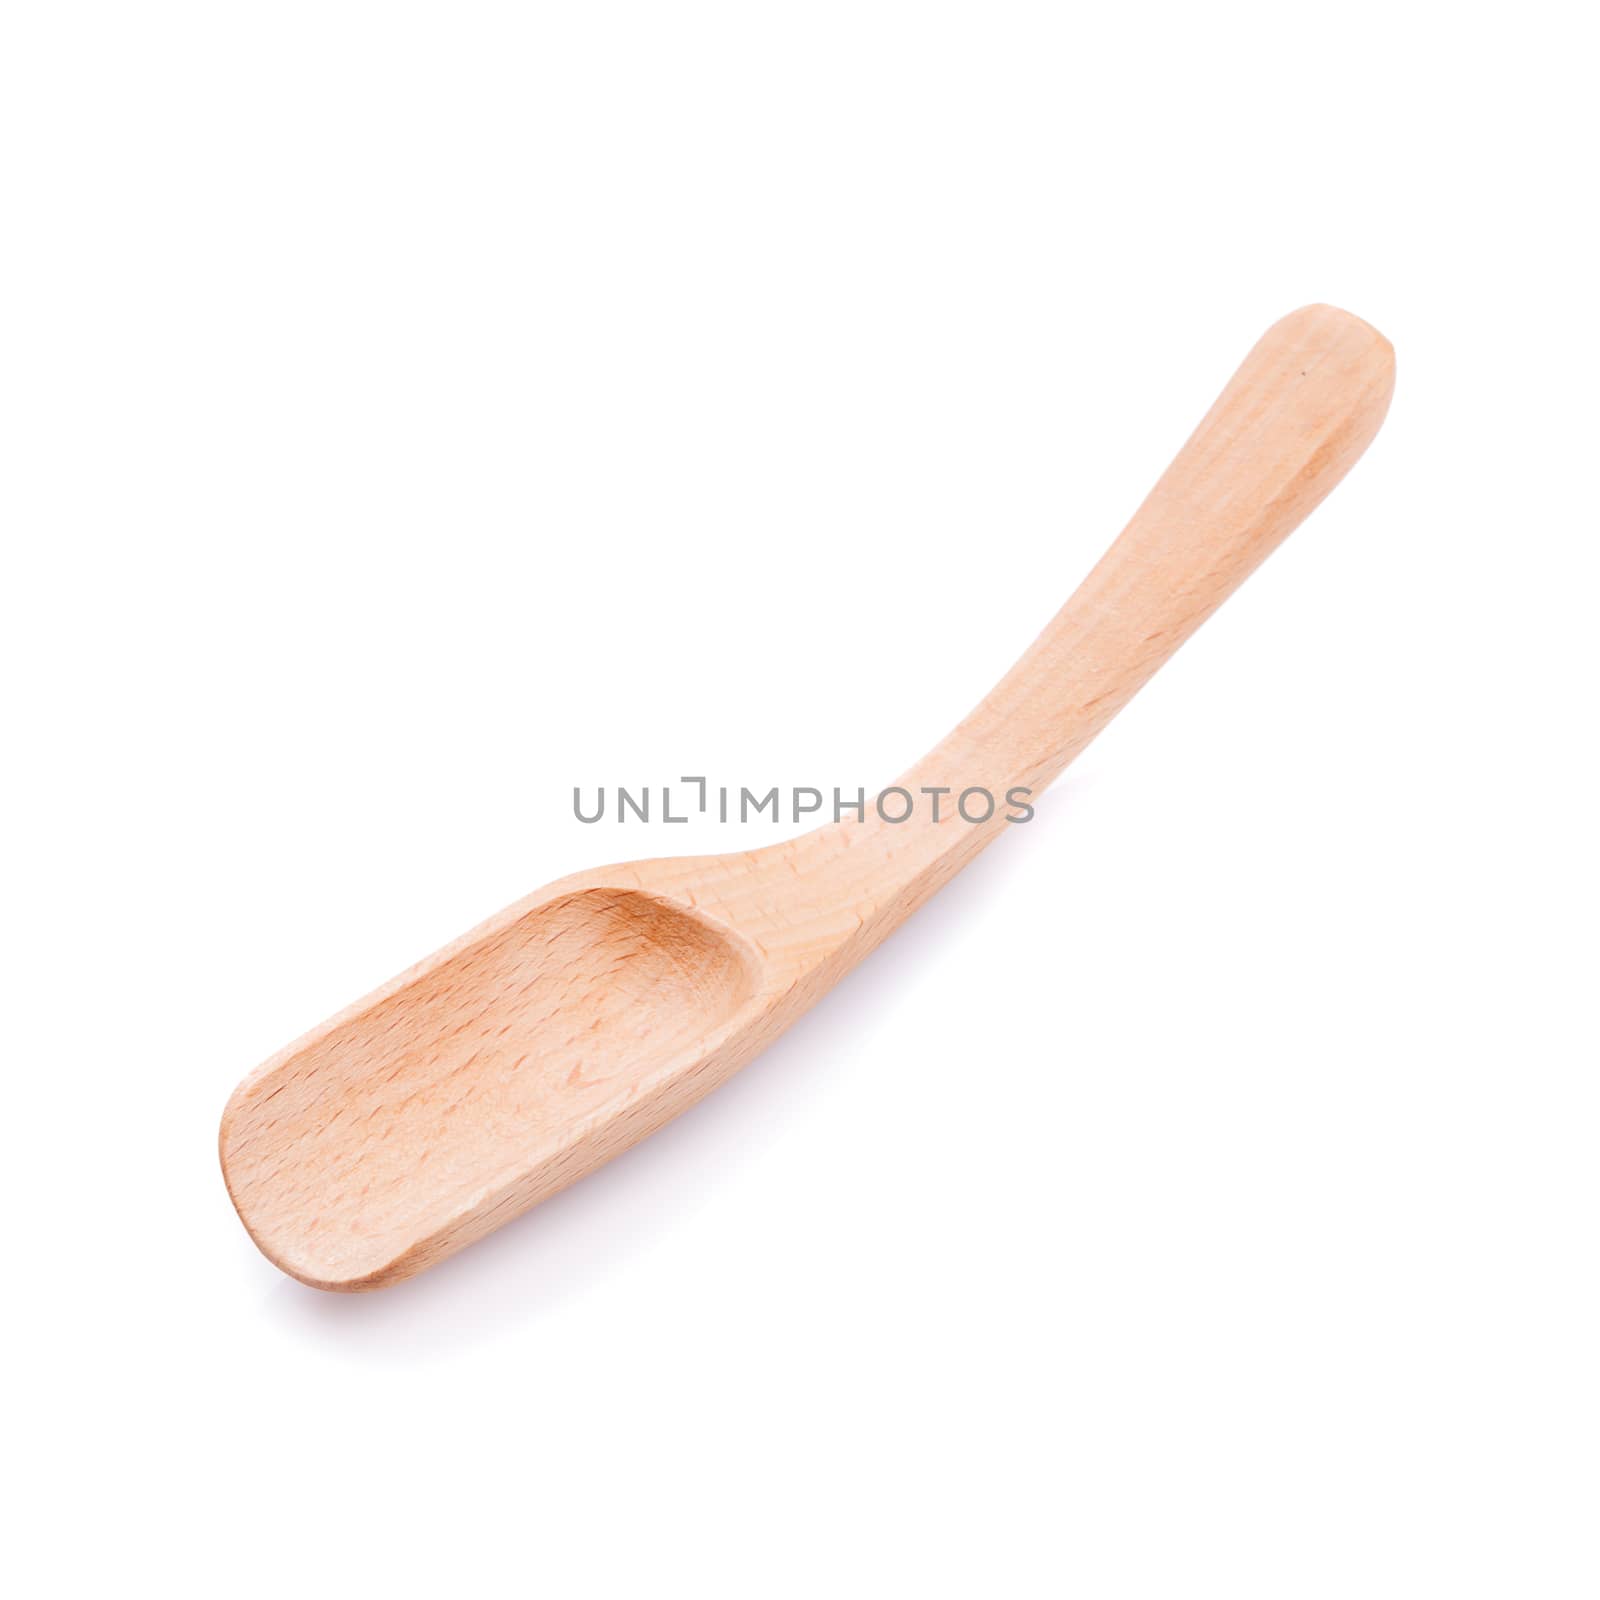 Wooden spoon on a white background.